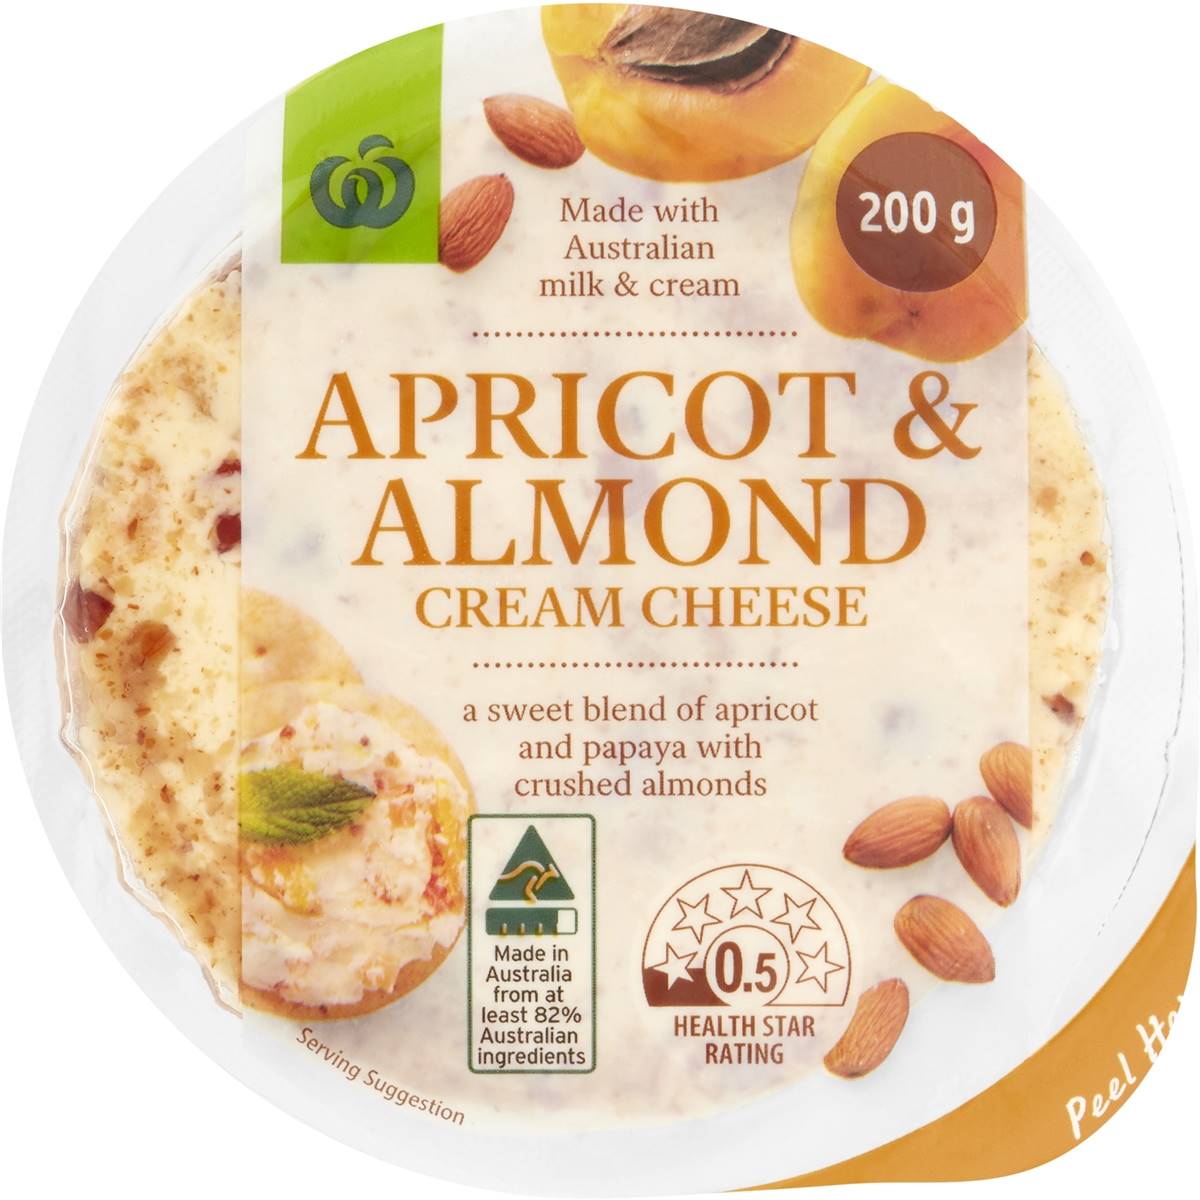 Calories in Woolworths Apricot & Almond Cream Cheese